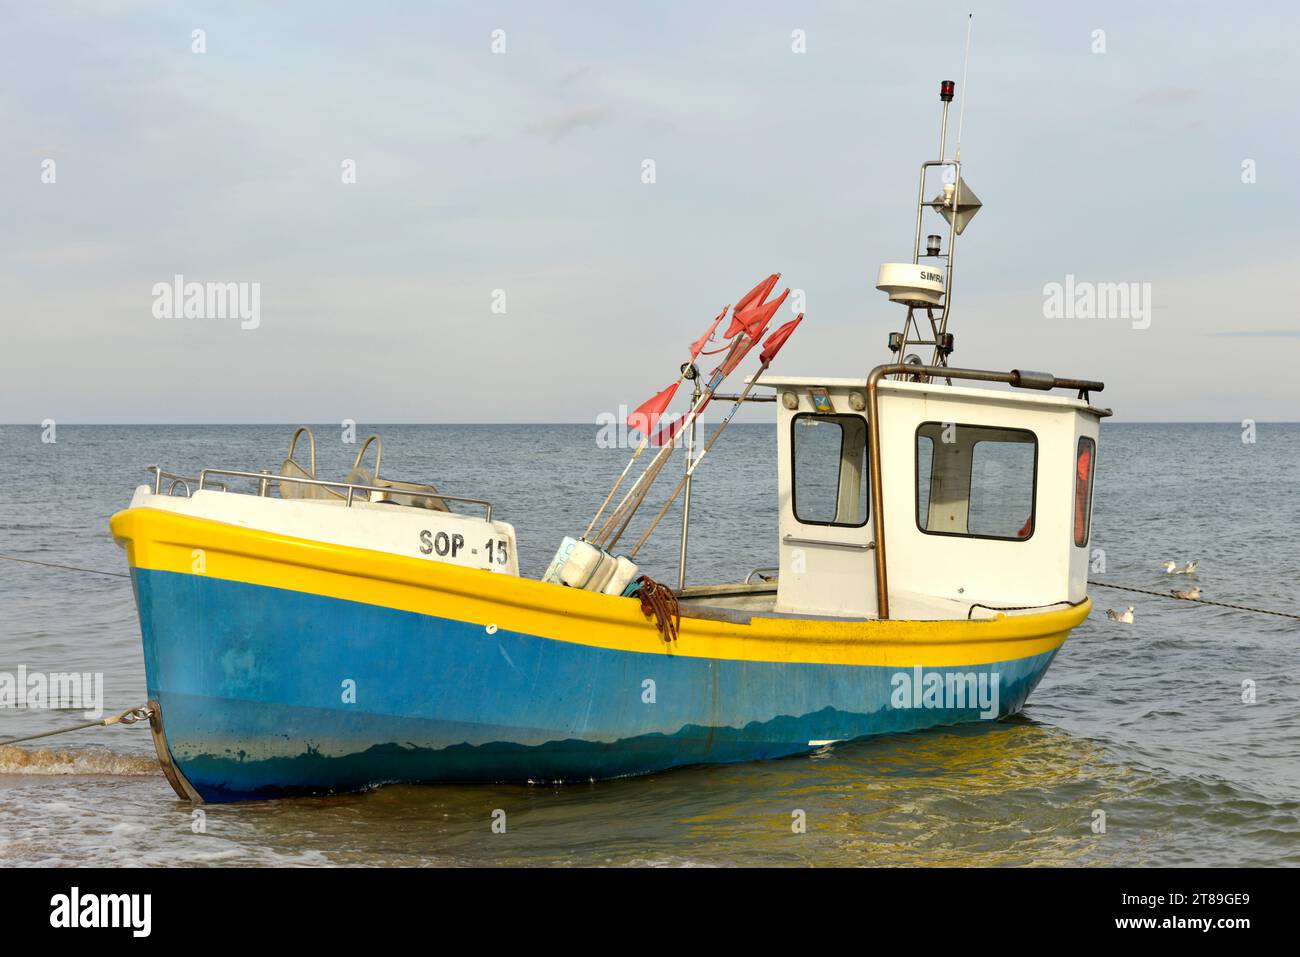 Beached small blue fishing motorboat registered in Sopot in shallow sea water, Baltic Sea, Sopot, Poland, Europe, EU Stock Photo